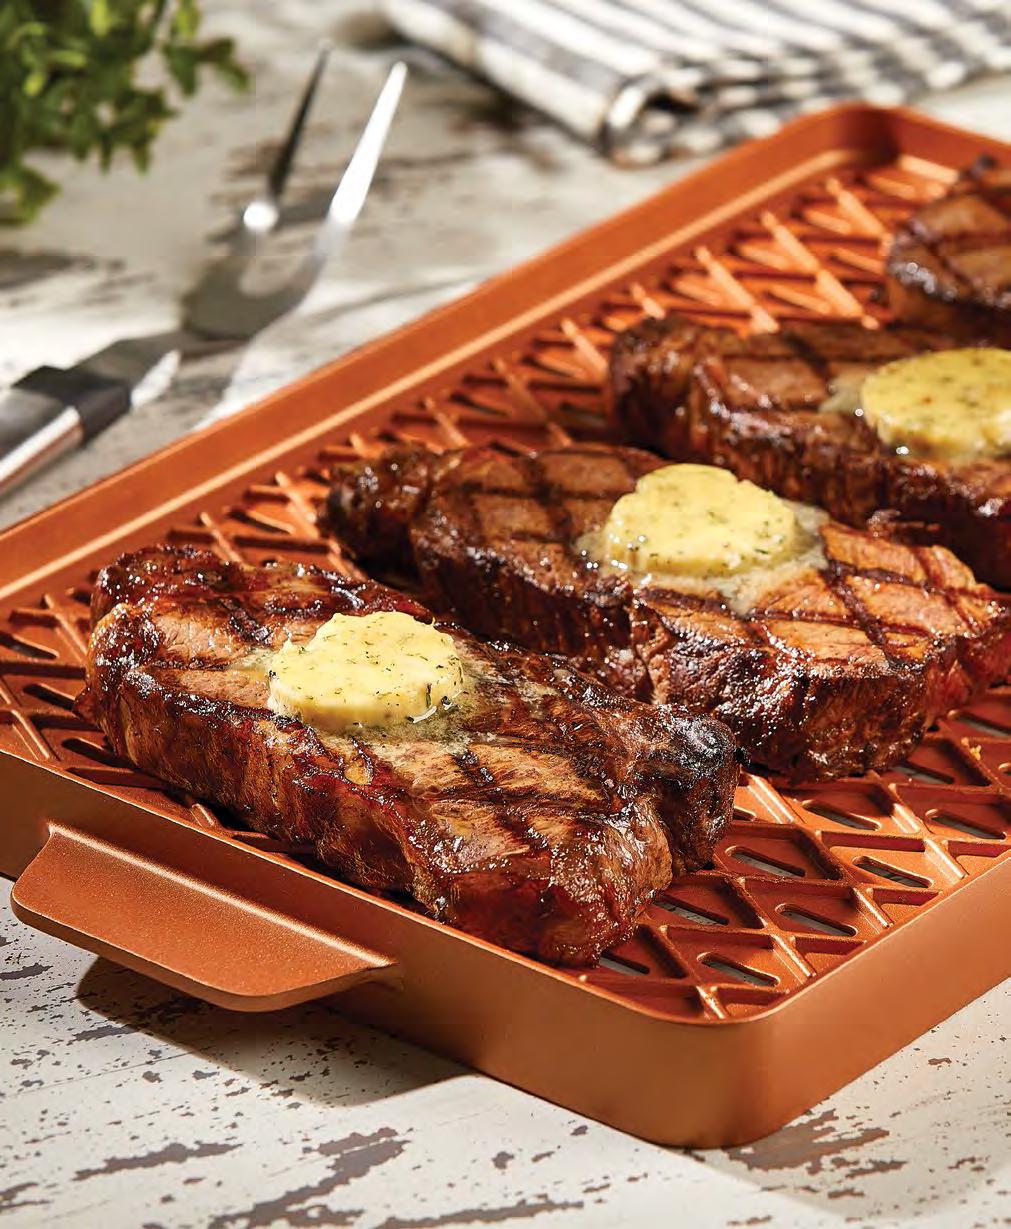 Grilled NY Strip Steaks with Roasted Garlic Thyme Butter 6 thick NY strips steaks, trimmed 1 tbsp. sea salt ½ tbsp.